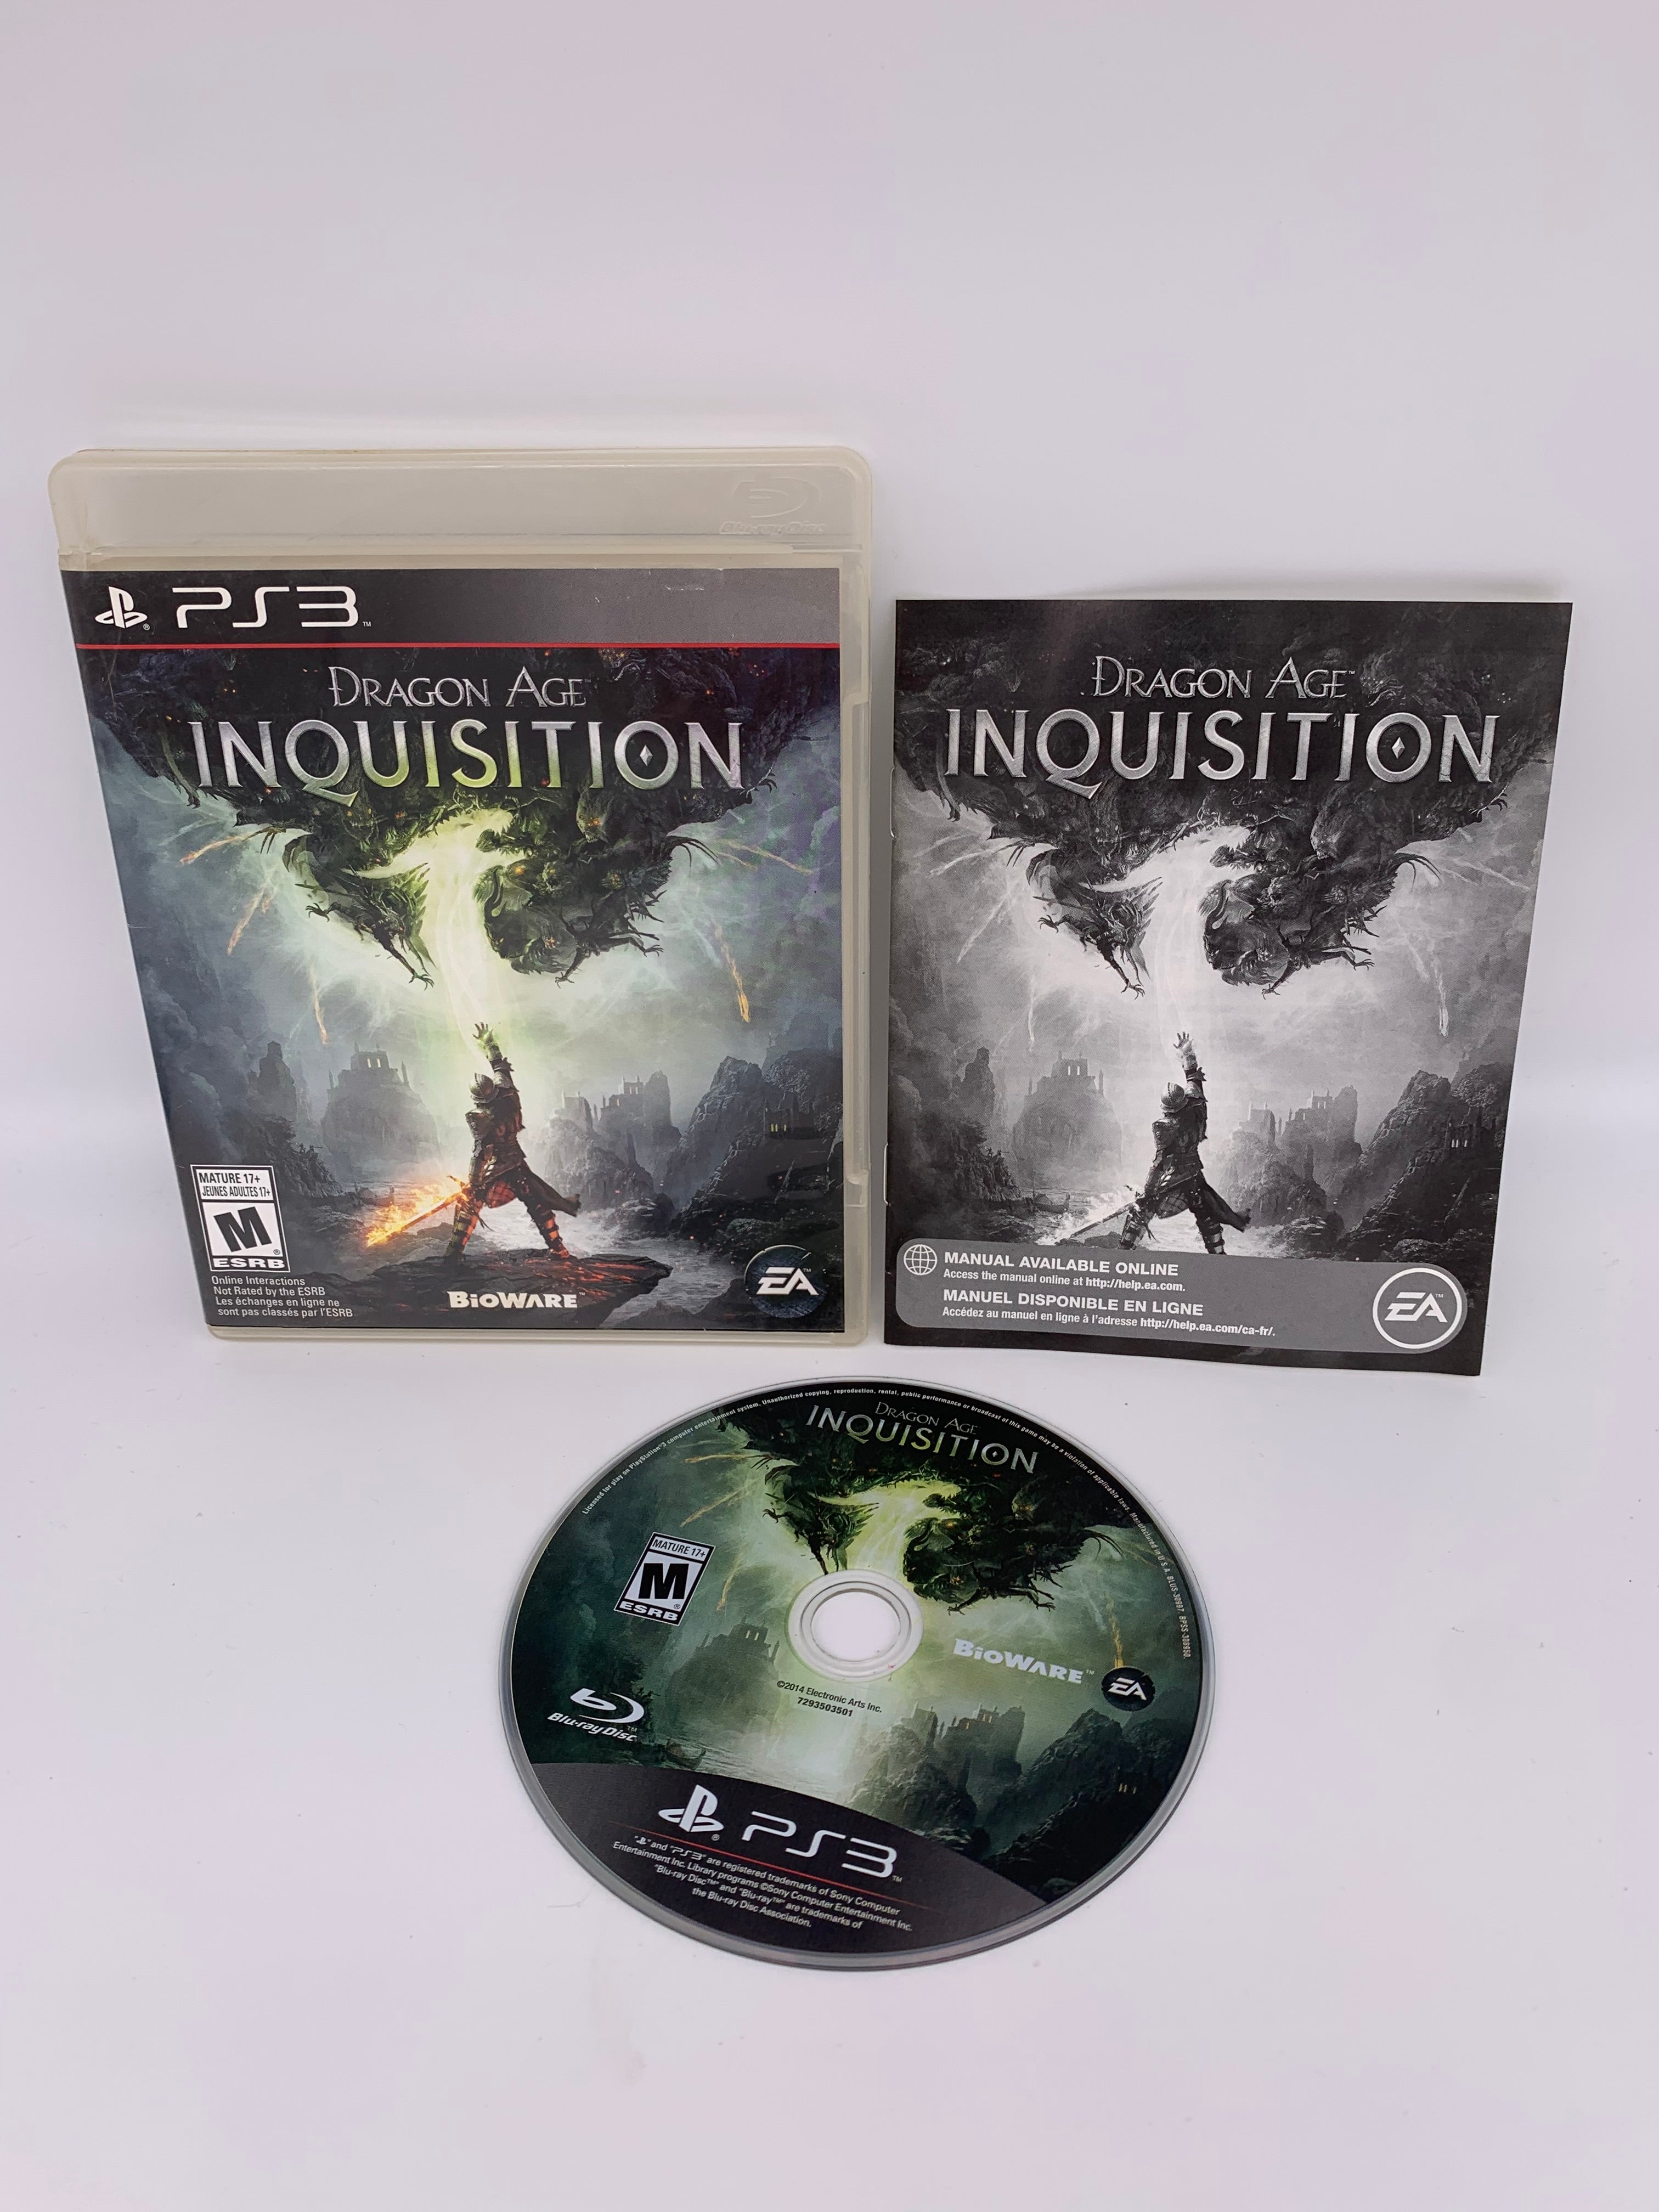 SONY PLAYSTATiON 3 [PS3] | DRAGON AGE iNQUiSiTiON